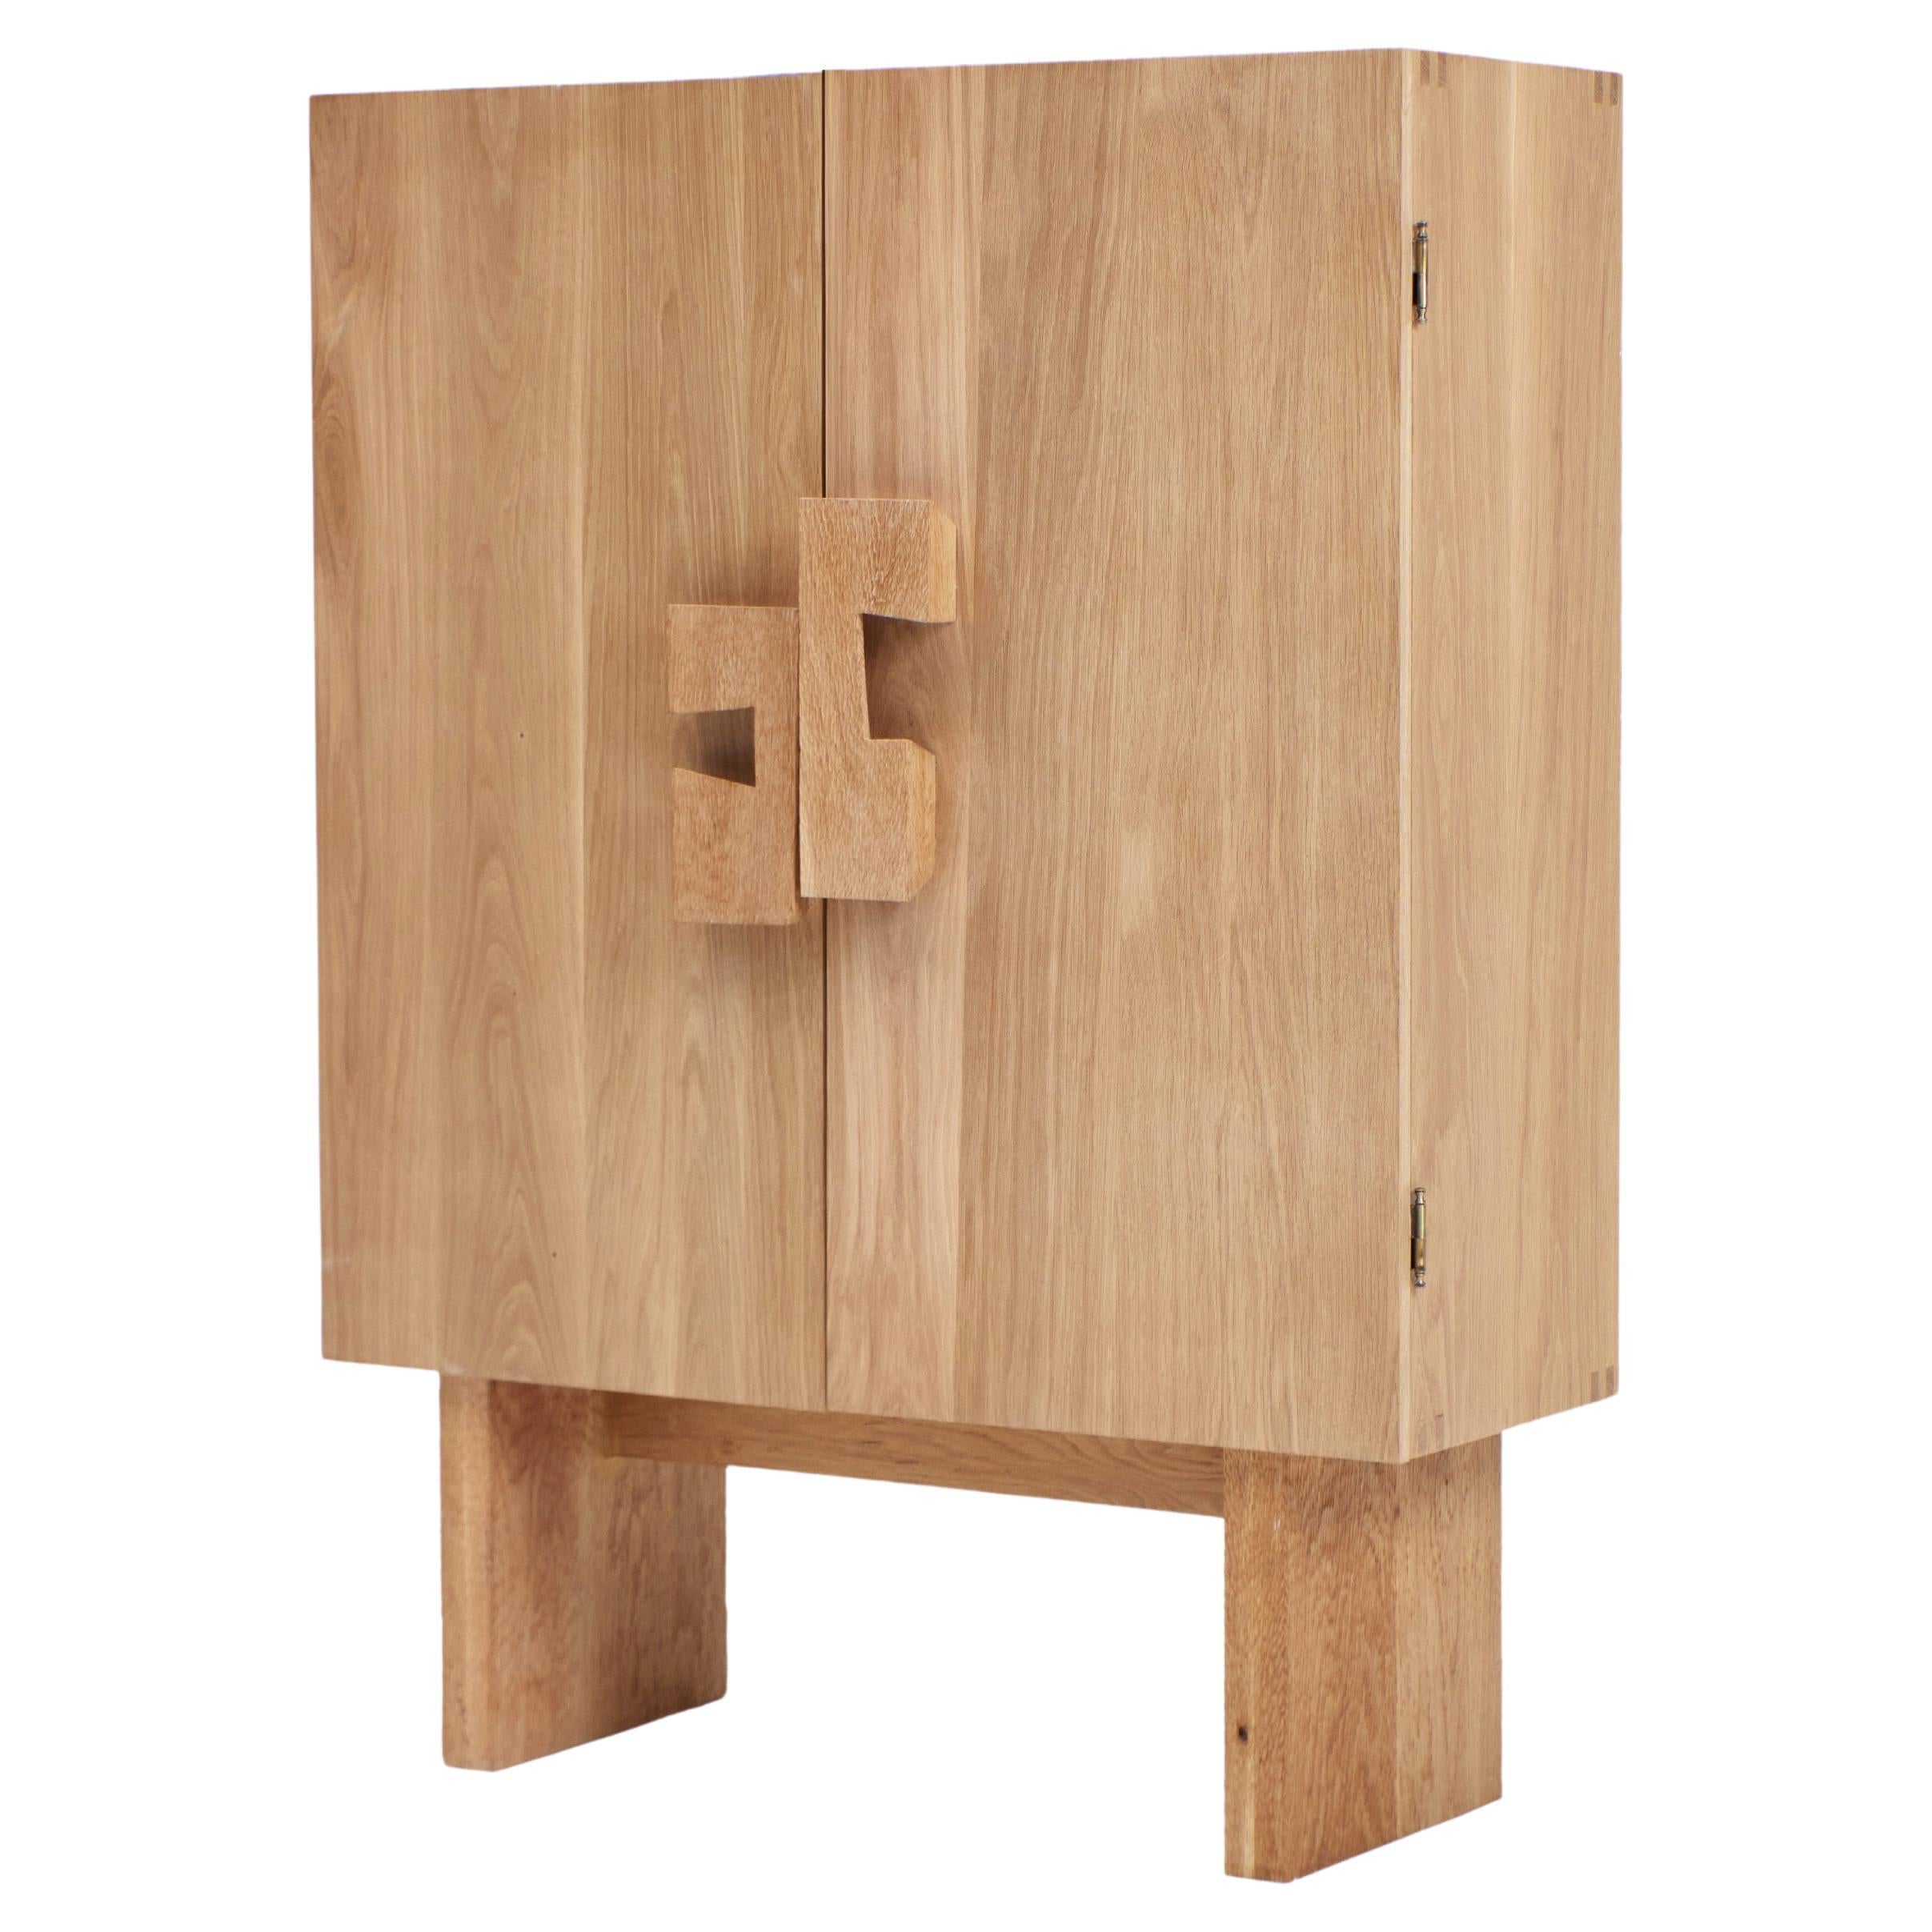 Douro Cabinet
Designed by Project 213A in 2023

Handmade by skilled artisans in solid oak. The cabinet features double doors with handles and legs decorated with a hand carved texture.

Bespoke dimensions and inner shelves upon request.
Production